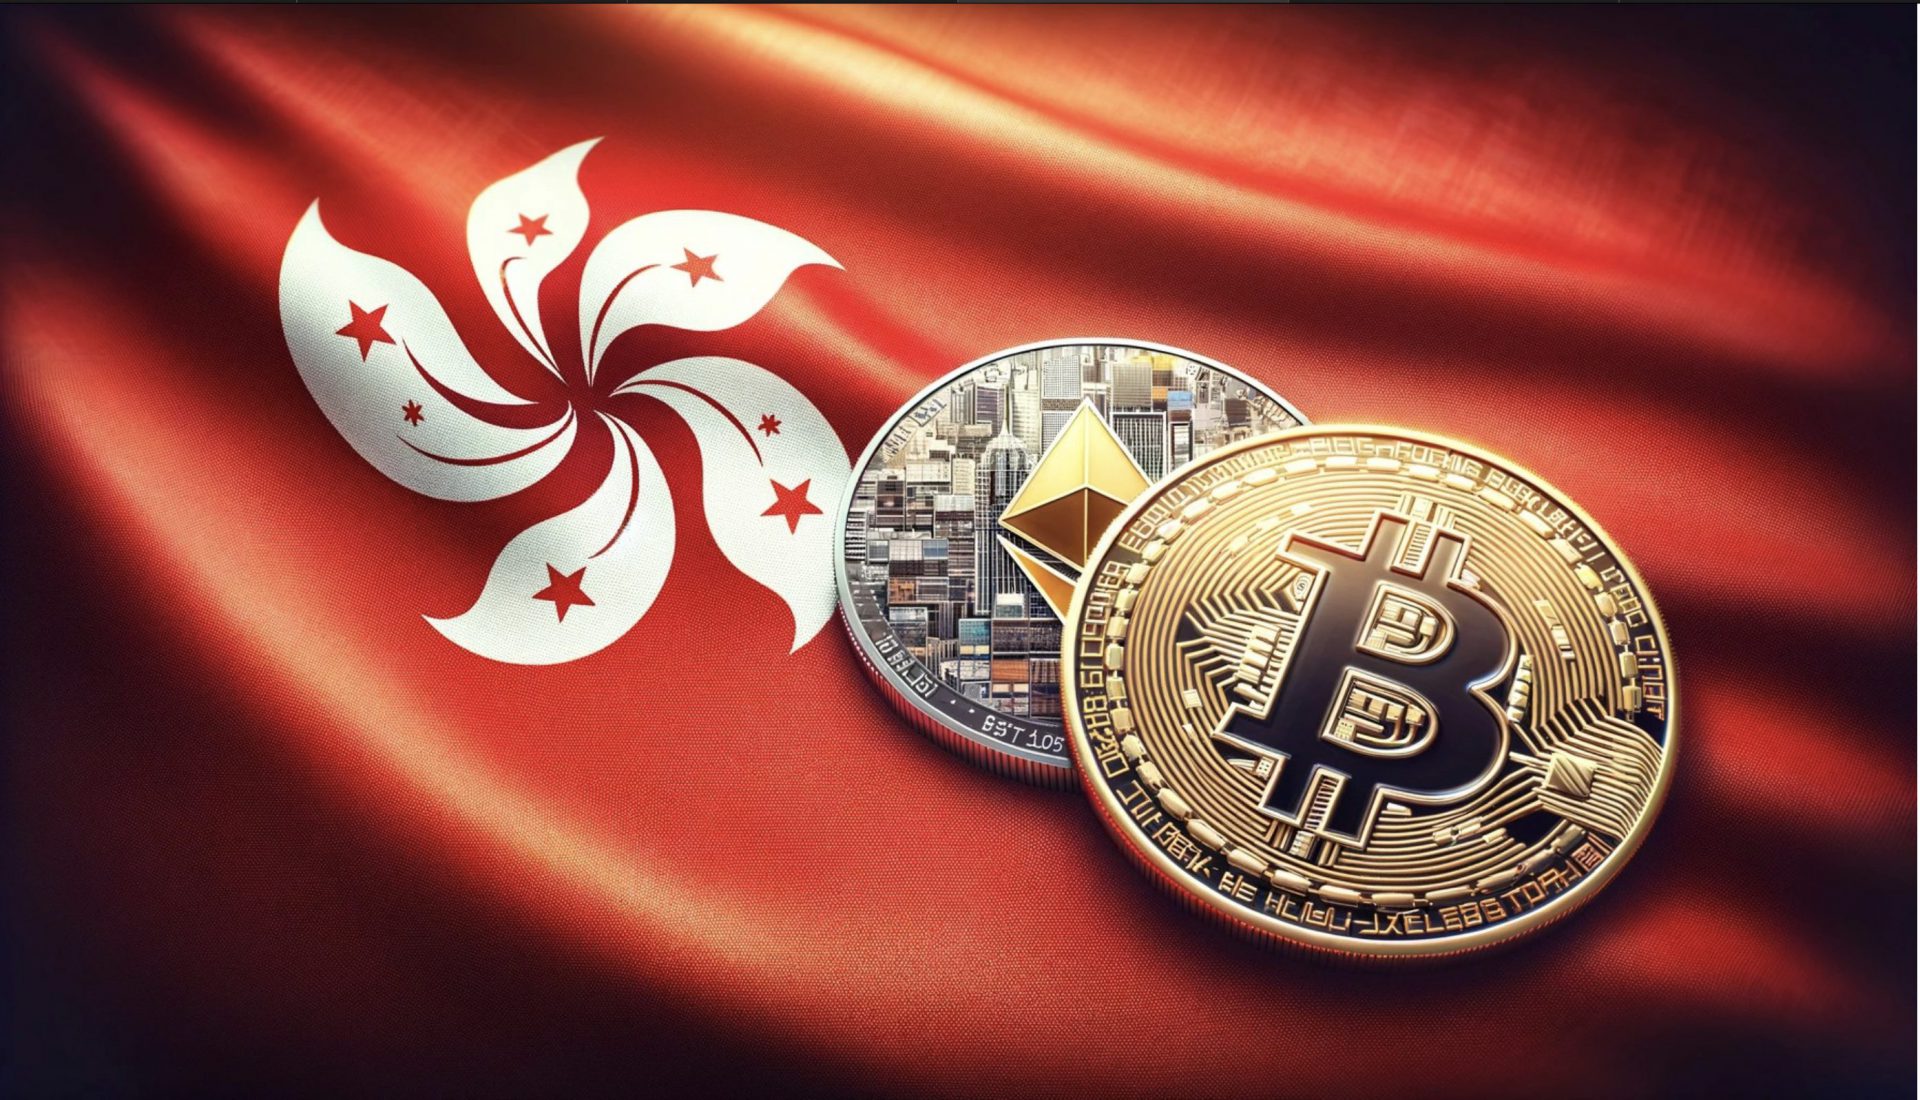 Hong Kong Bitcoin & Ether ETFs See $11M Volume on First Day